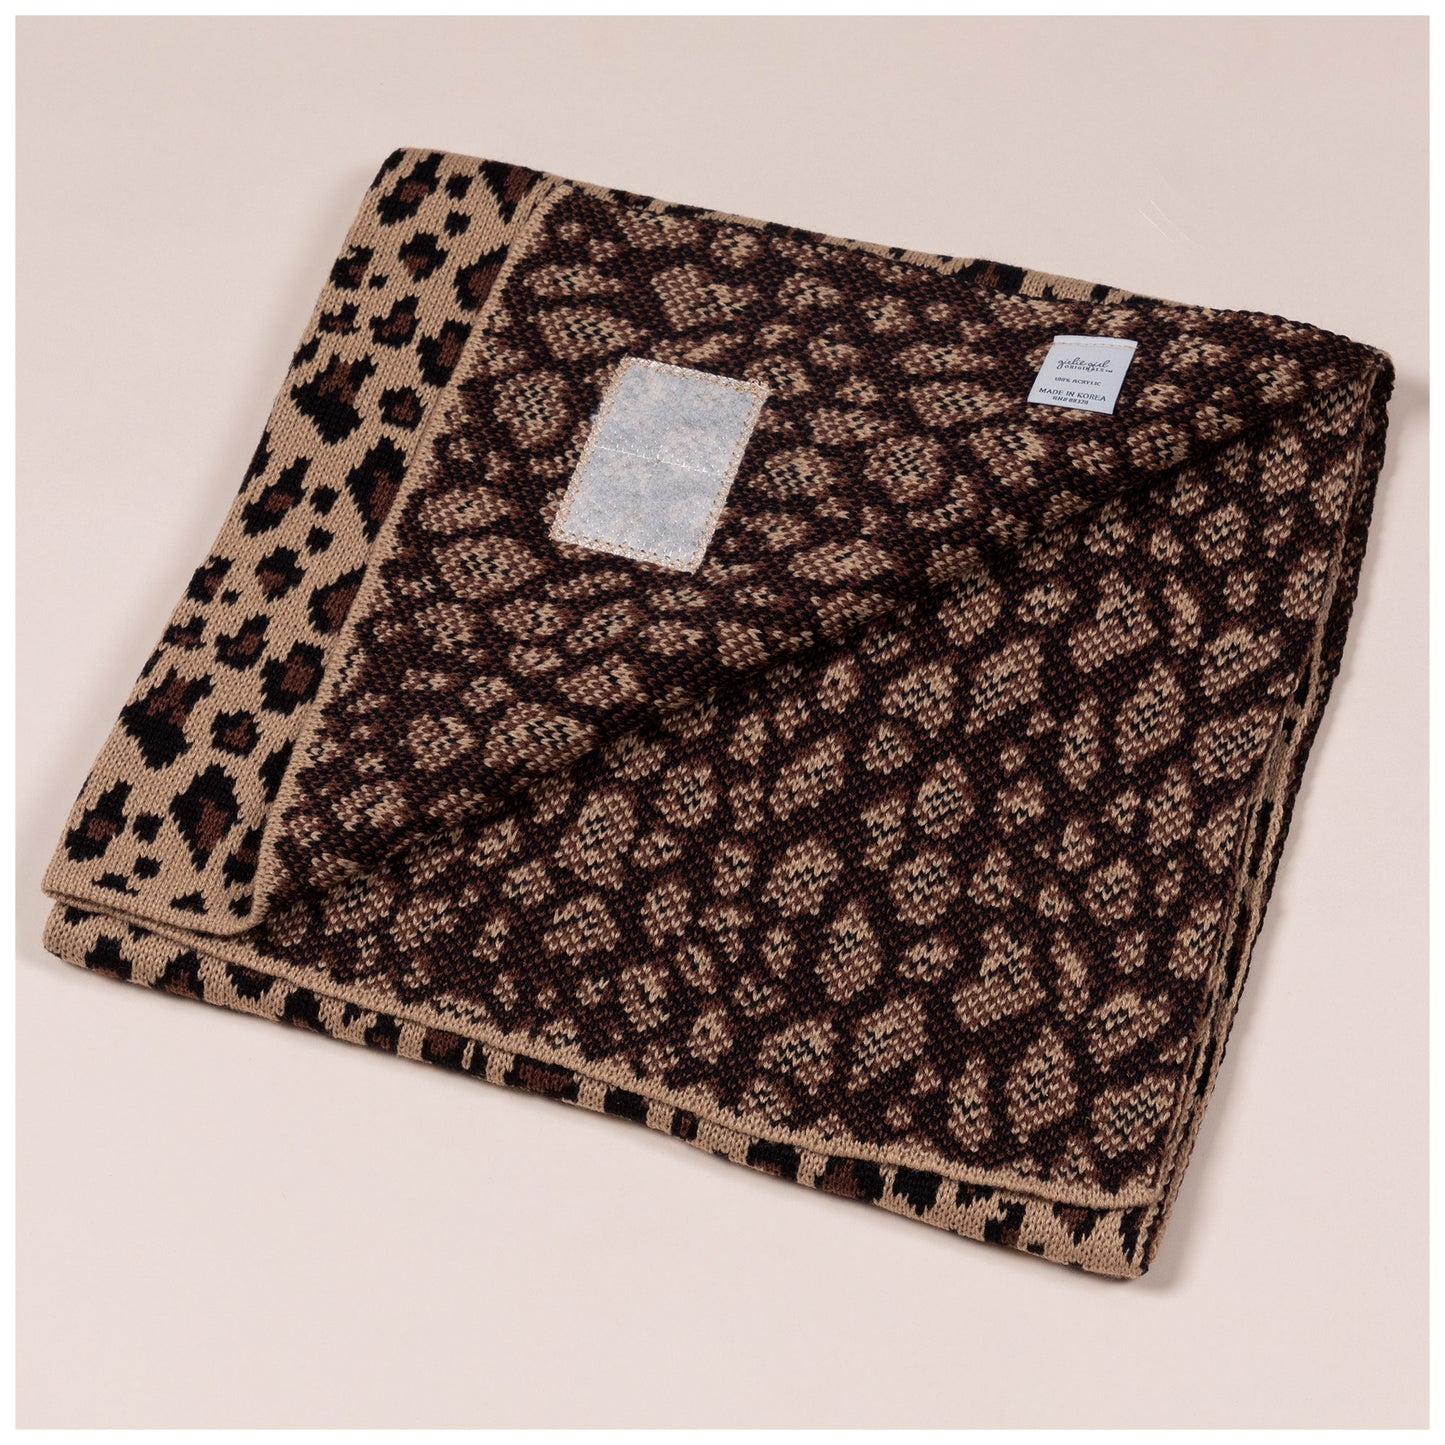 C&C&trade; Home Leopard Knit Baby Blanket